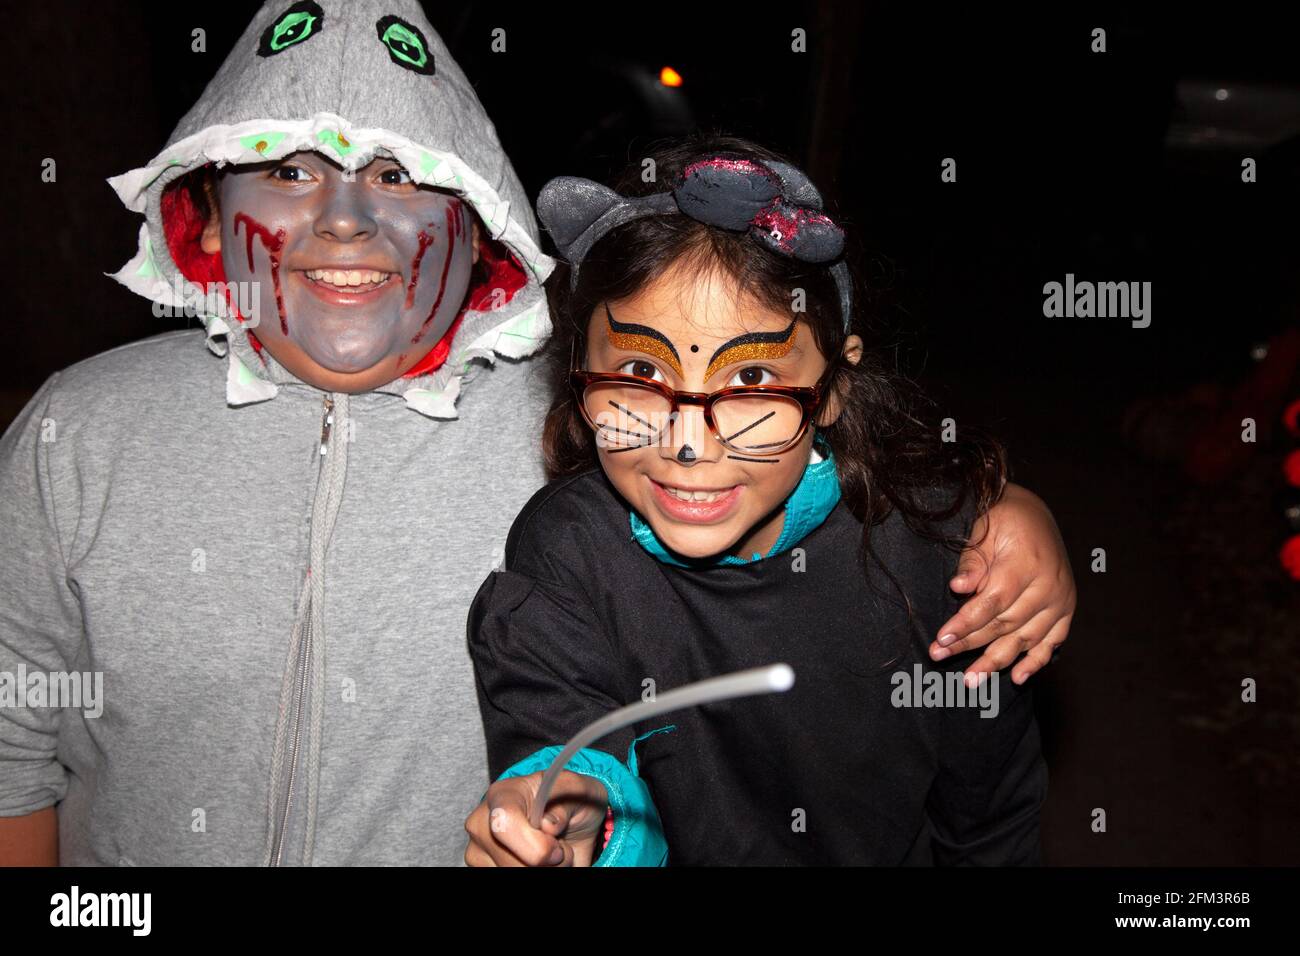 Halloween trick and treaters costumed as cat and ghoulish like dog. St Paul Minnesota MN USA Stock Photo